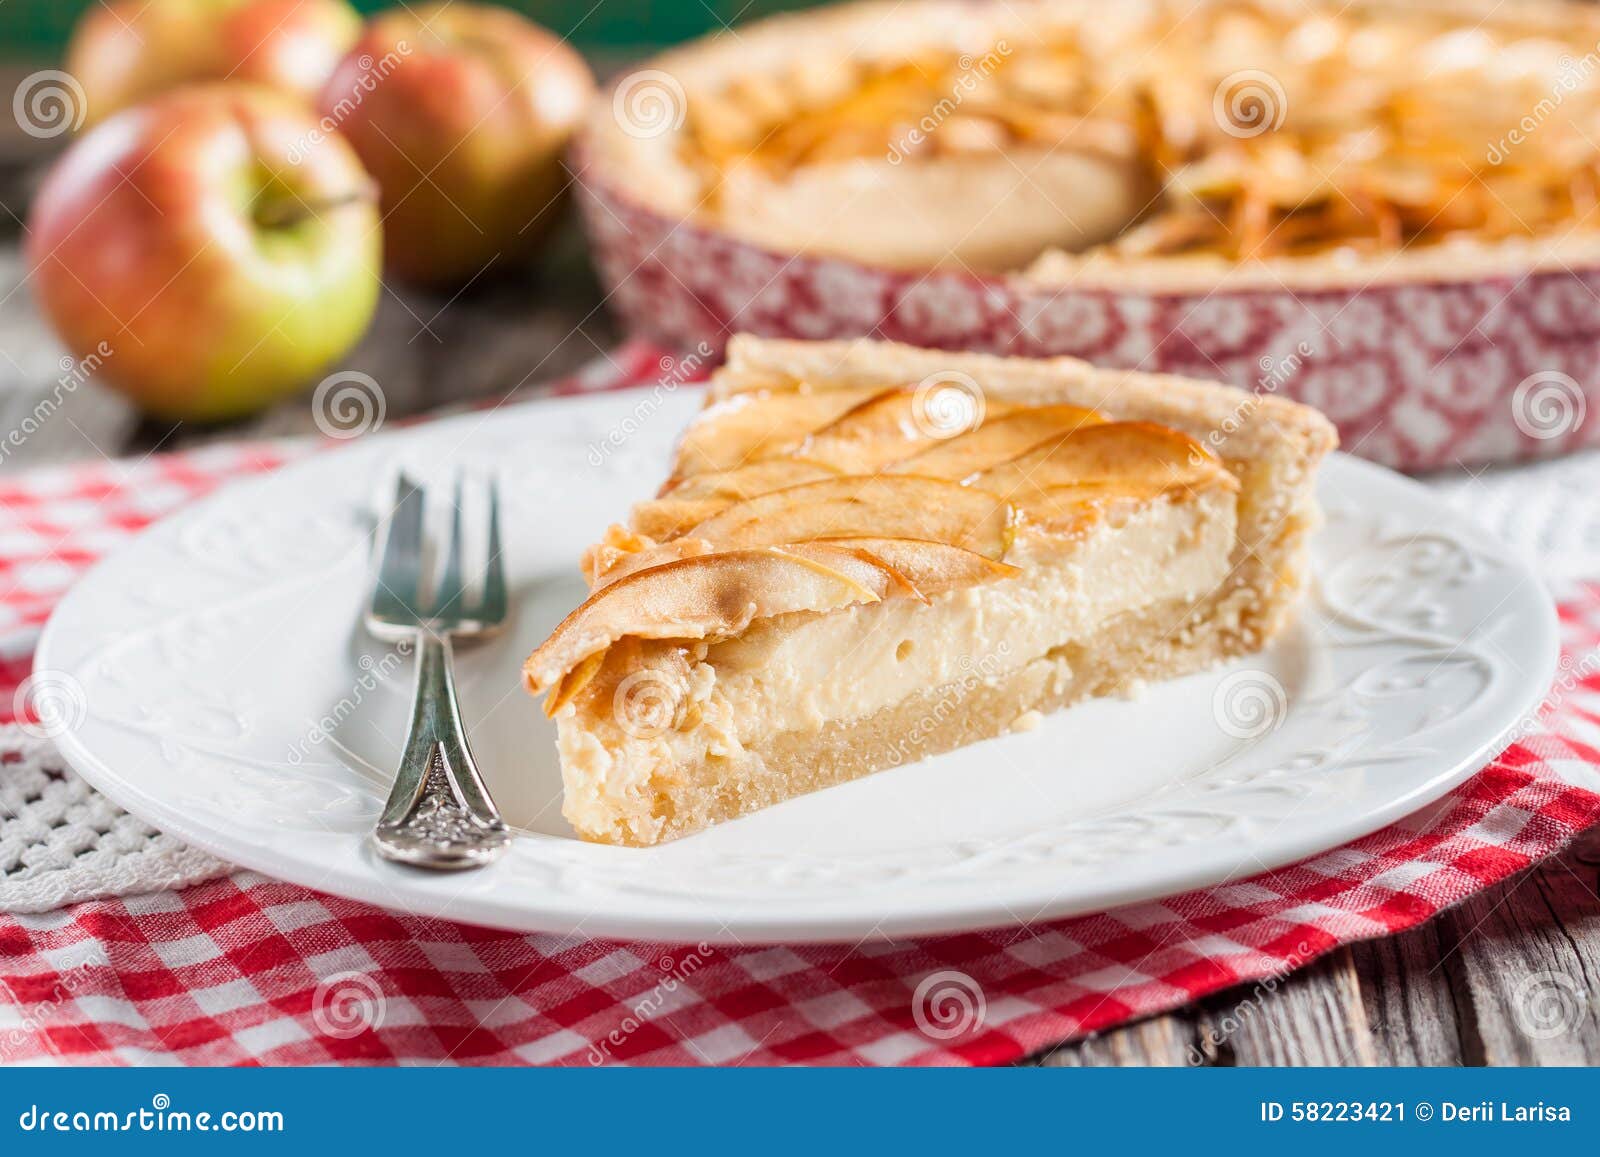 Apple Pie With Cottage Cheese Stock Image Image Of Fall Plate